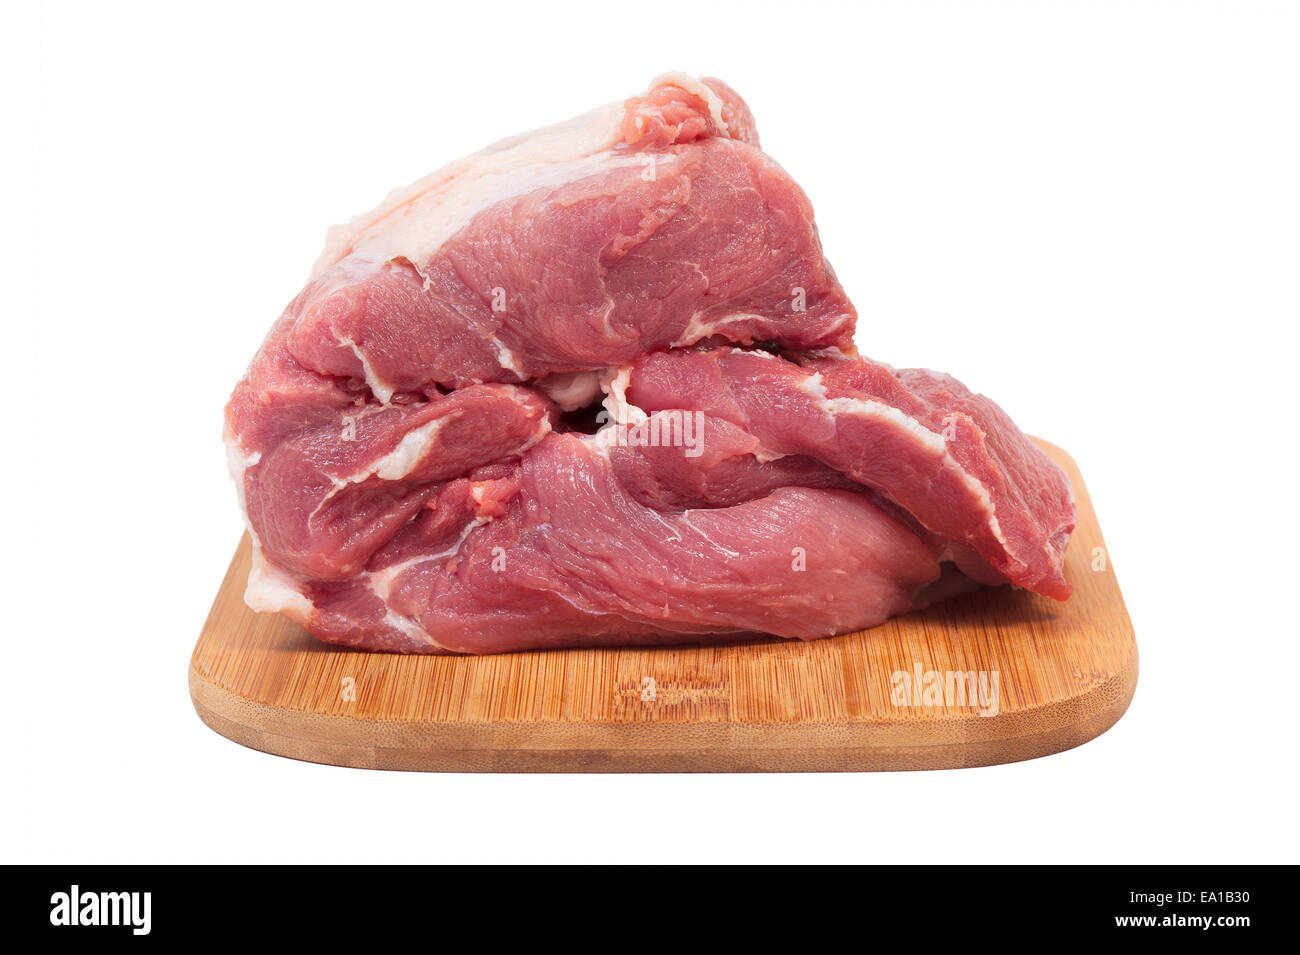 butcher's meat Stock Photo